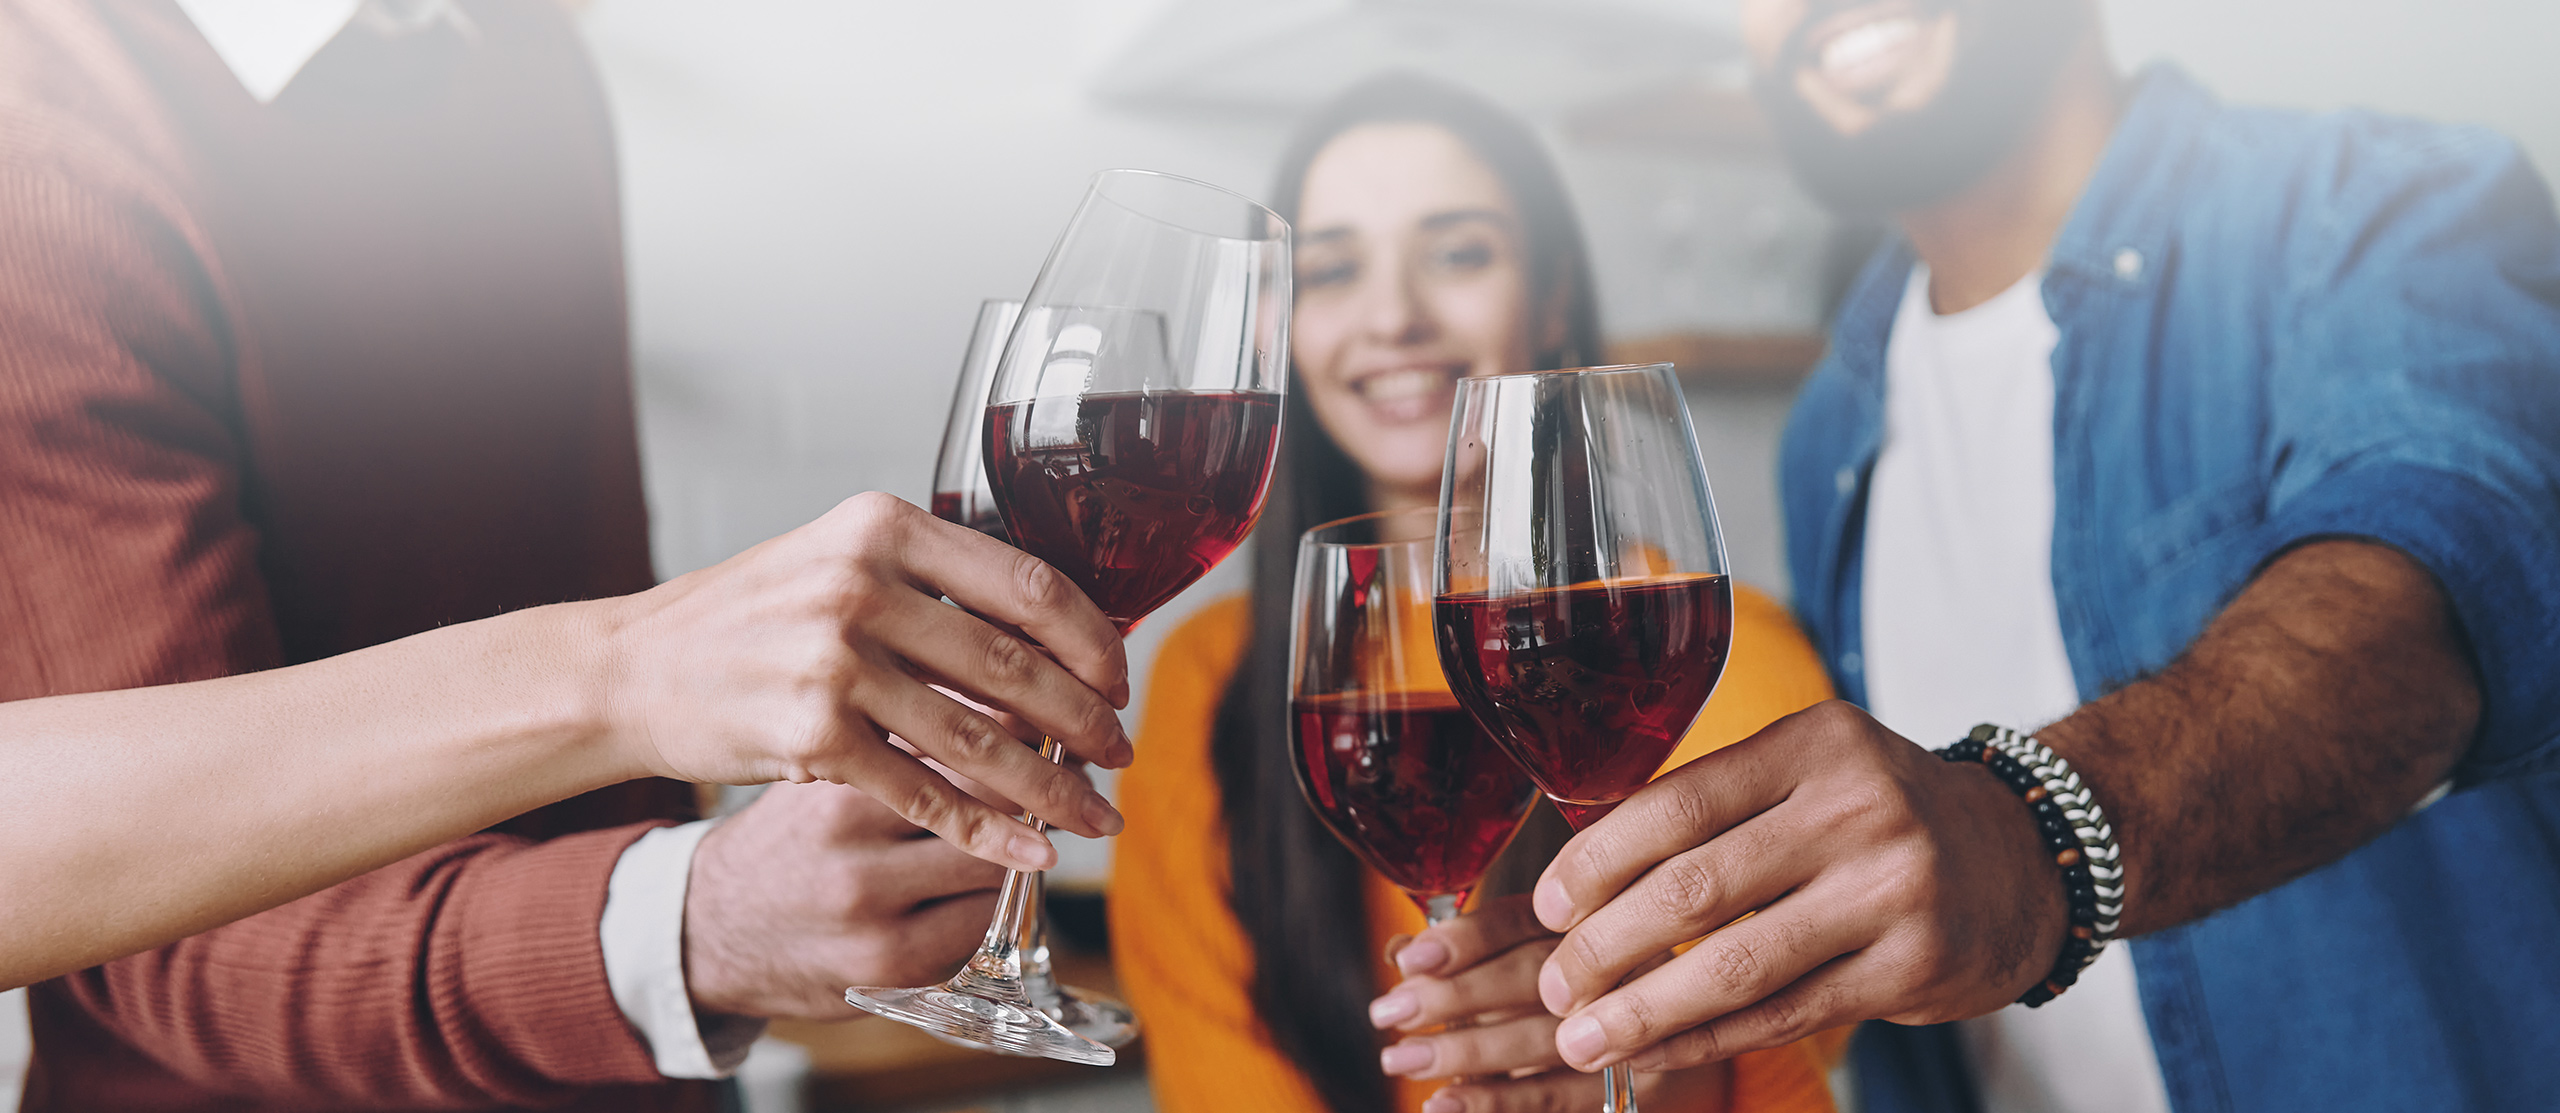 group of people clinking red wine glasses and smiling